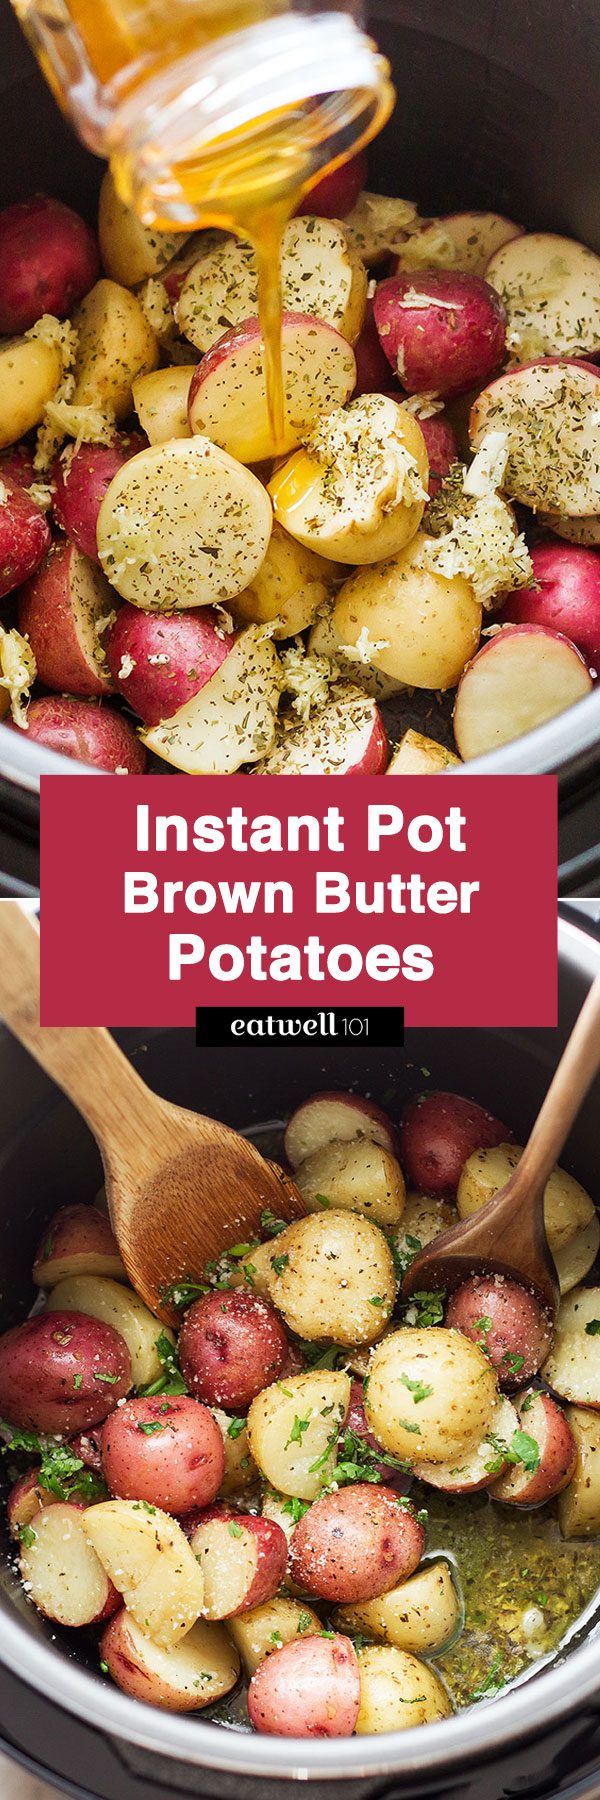 Instant Pot Garlic Brown Butter Potatoes - #eatwell101 #recipe - Ready in 7 minutes,  the easiest and fastest potatoes you will ever make. So moist and flavorful! 